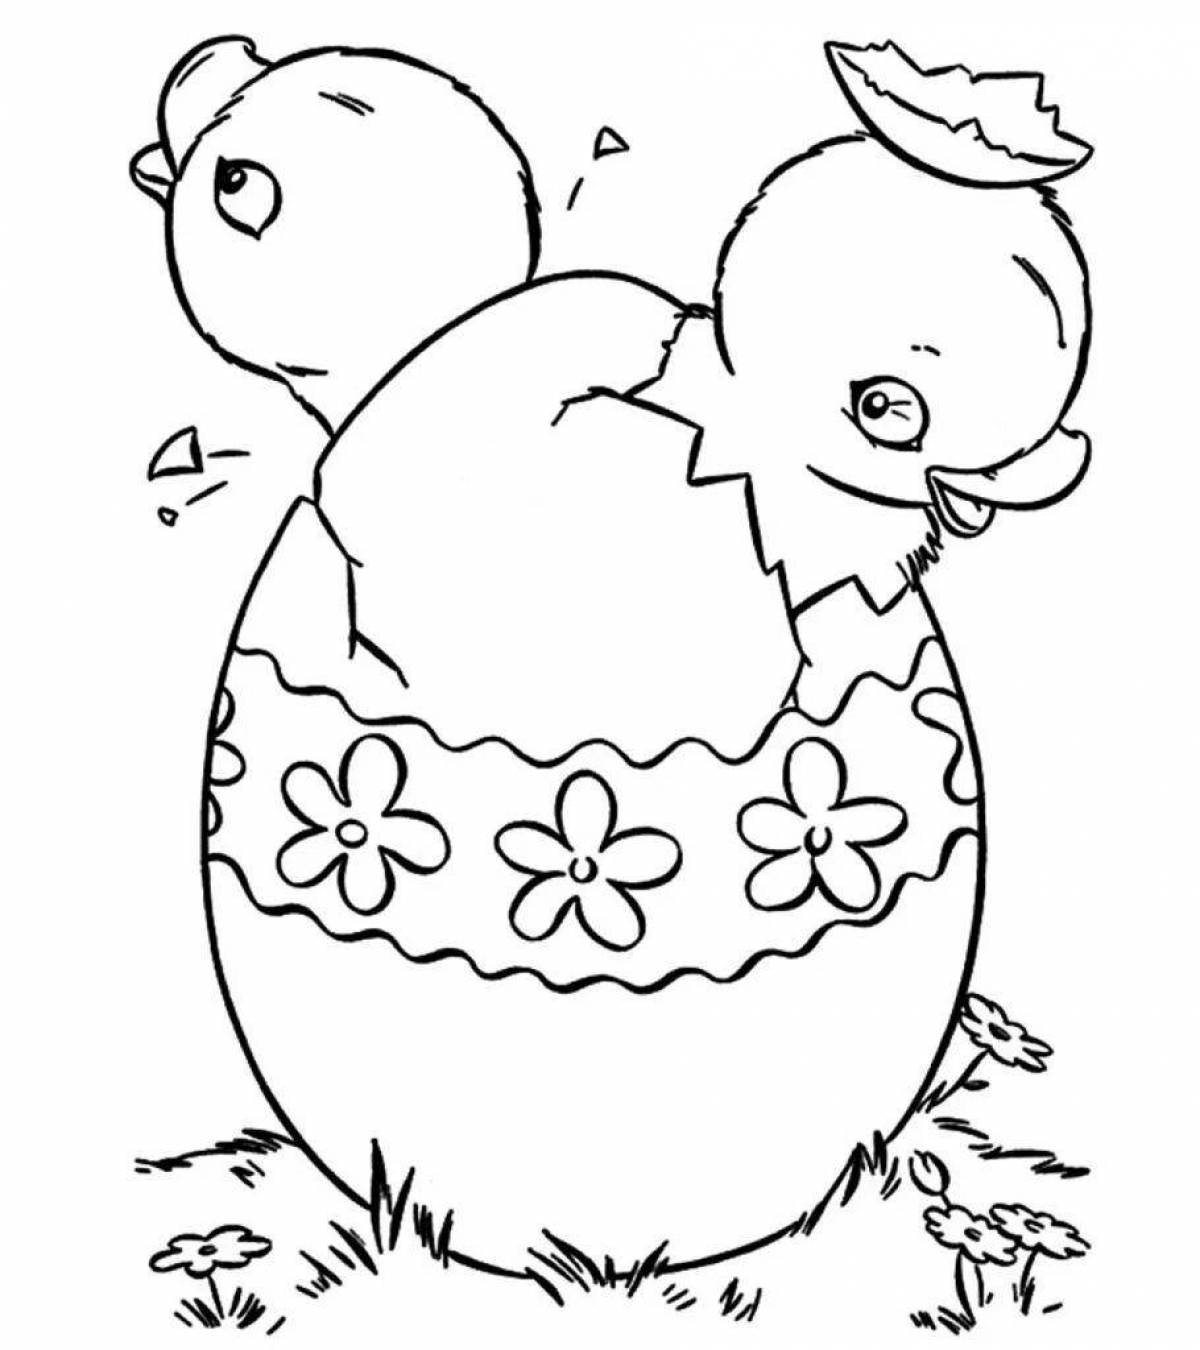 Snuggly coloring page chick and duckling